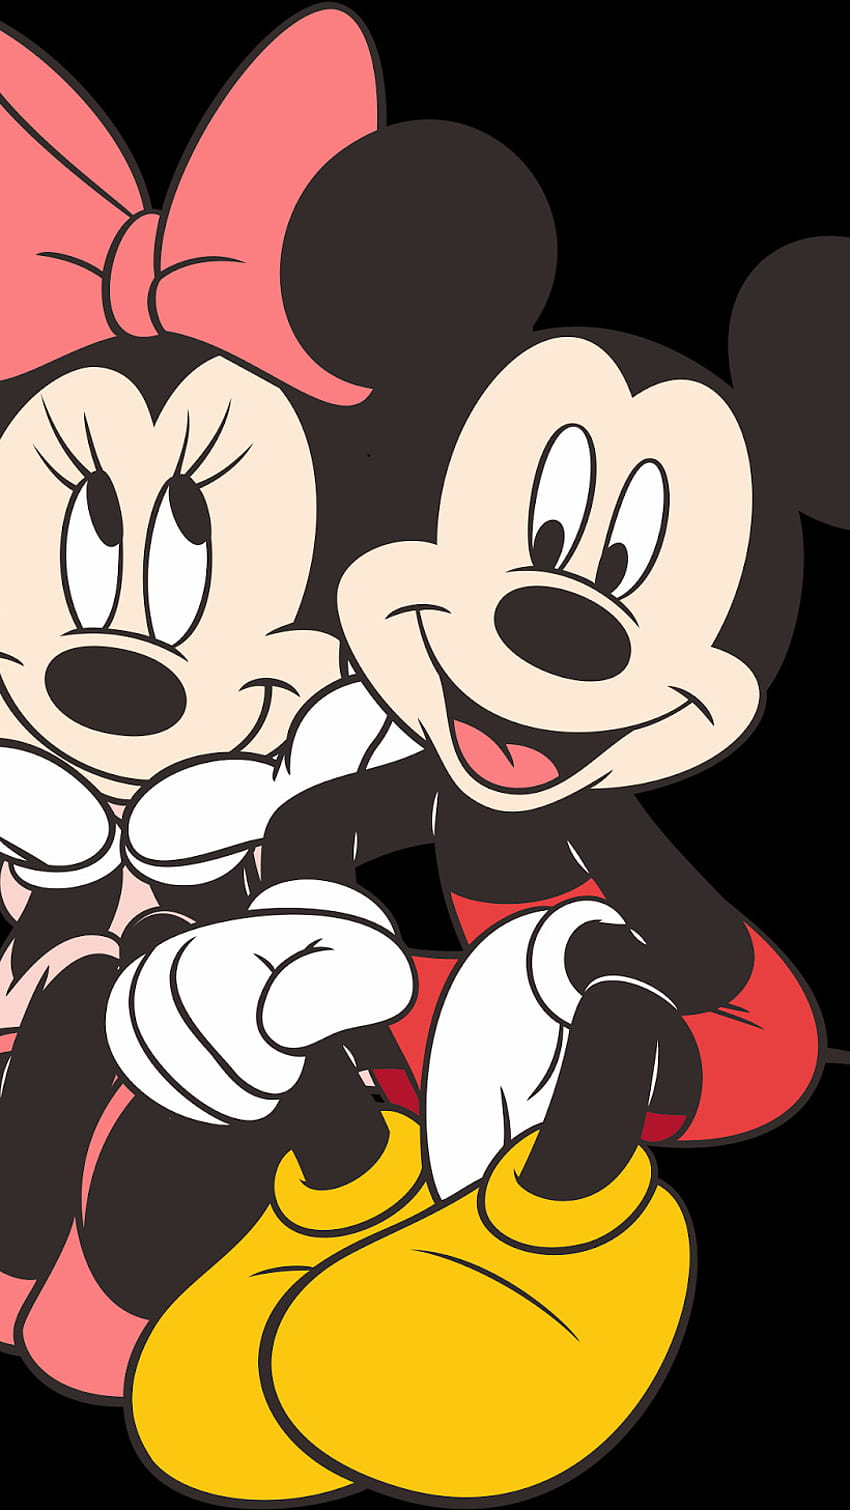 HD wallpaper: Disney, Mickey Mouse, Minnie Mouse | Wallpaper Flare